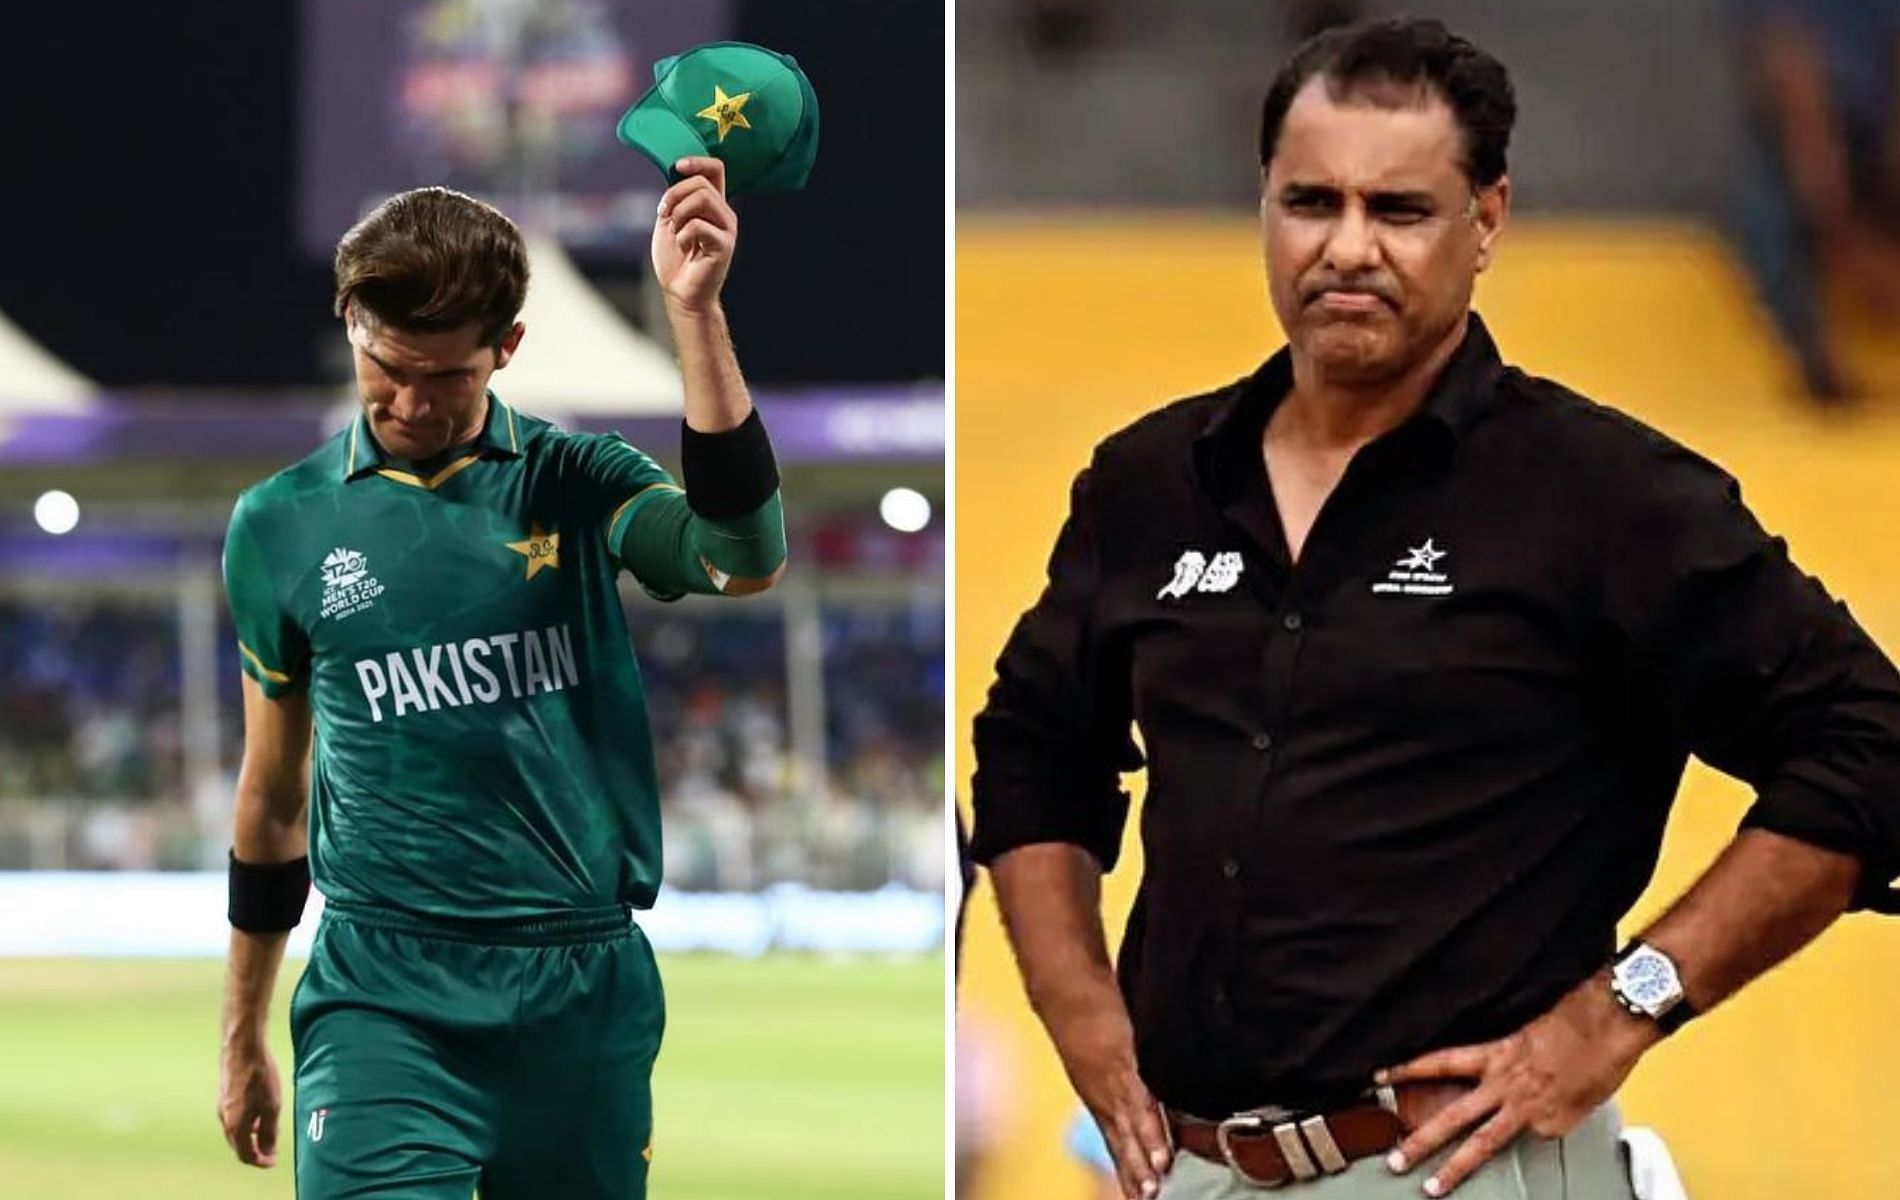 Shaheen Afridi (L) and Waqar Younis (R). (Pics: Instagram)